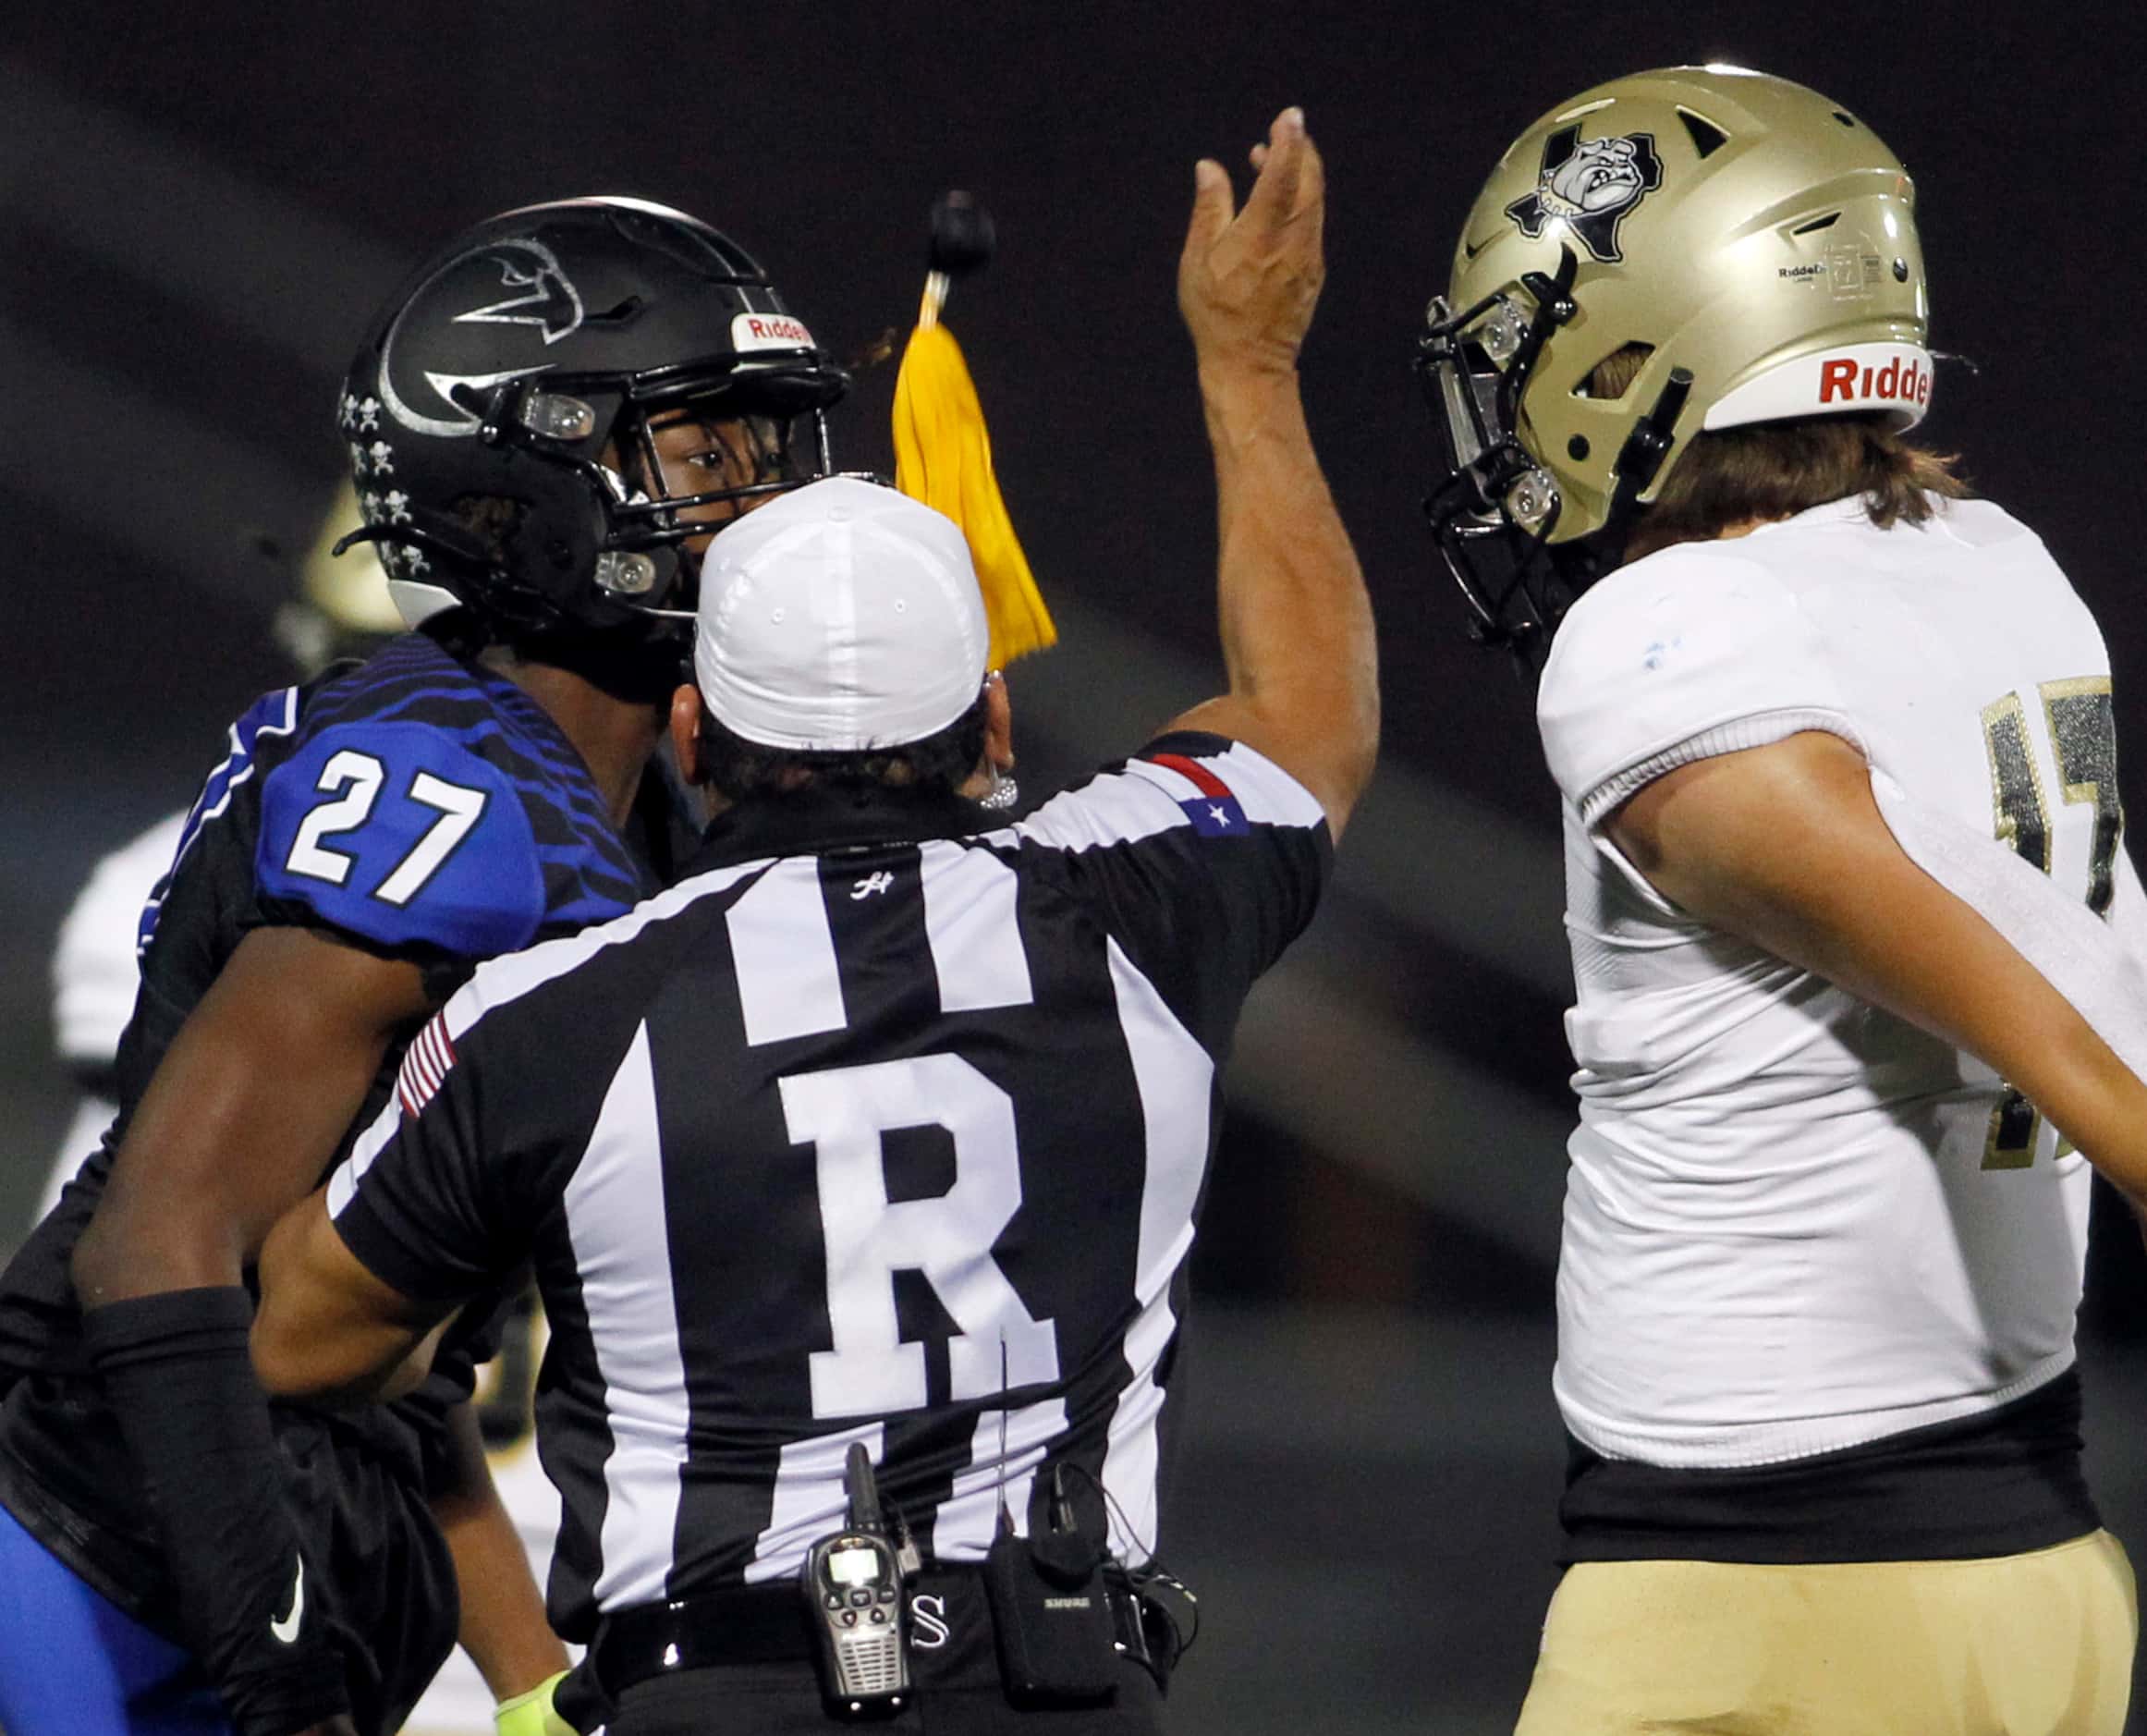 North Forney's Gianni Edwards (27) and Royse City's Hayden Herndon (17) were flagged for...